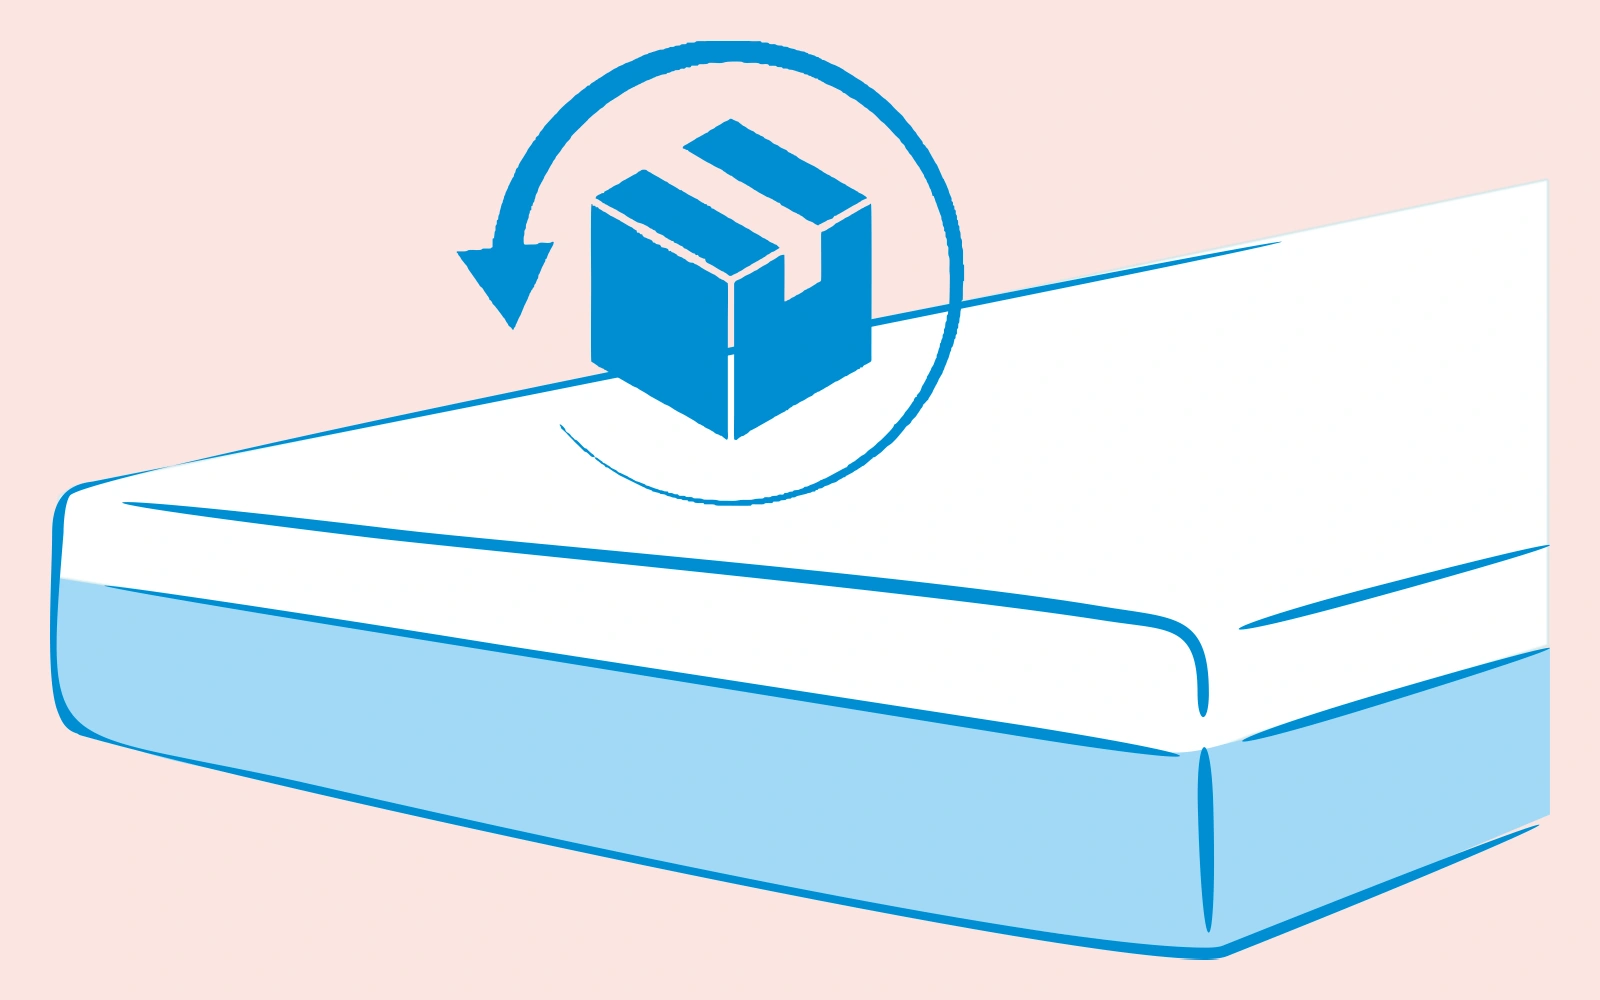 Complaint about the mattress, consumer rights, statutory warranty, and guarantee